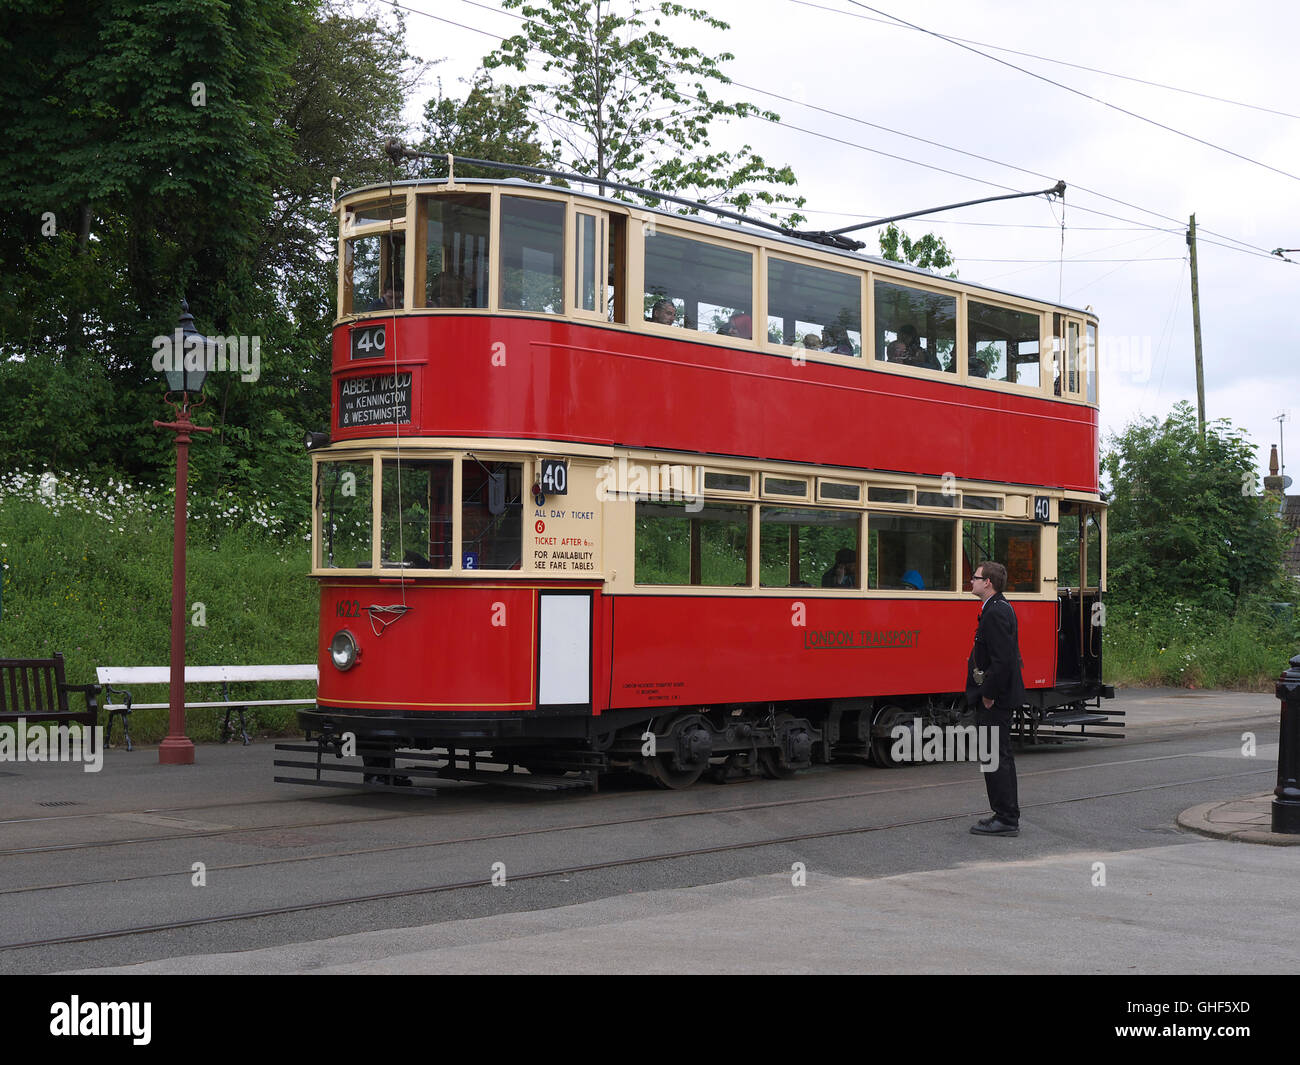 London transport vintage tram in preservation at Crich Tramway museum near Matlock Derbyshire Stock Photo